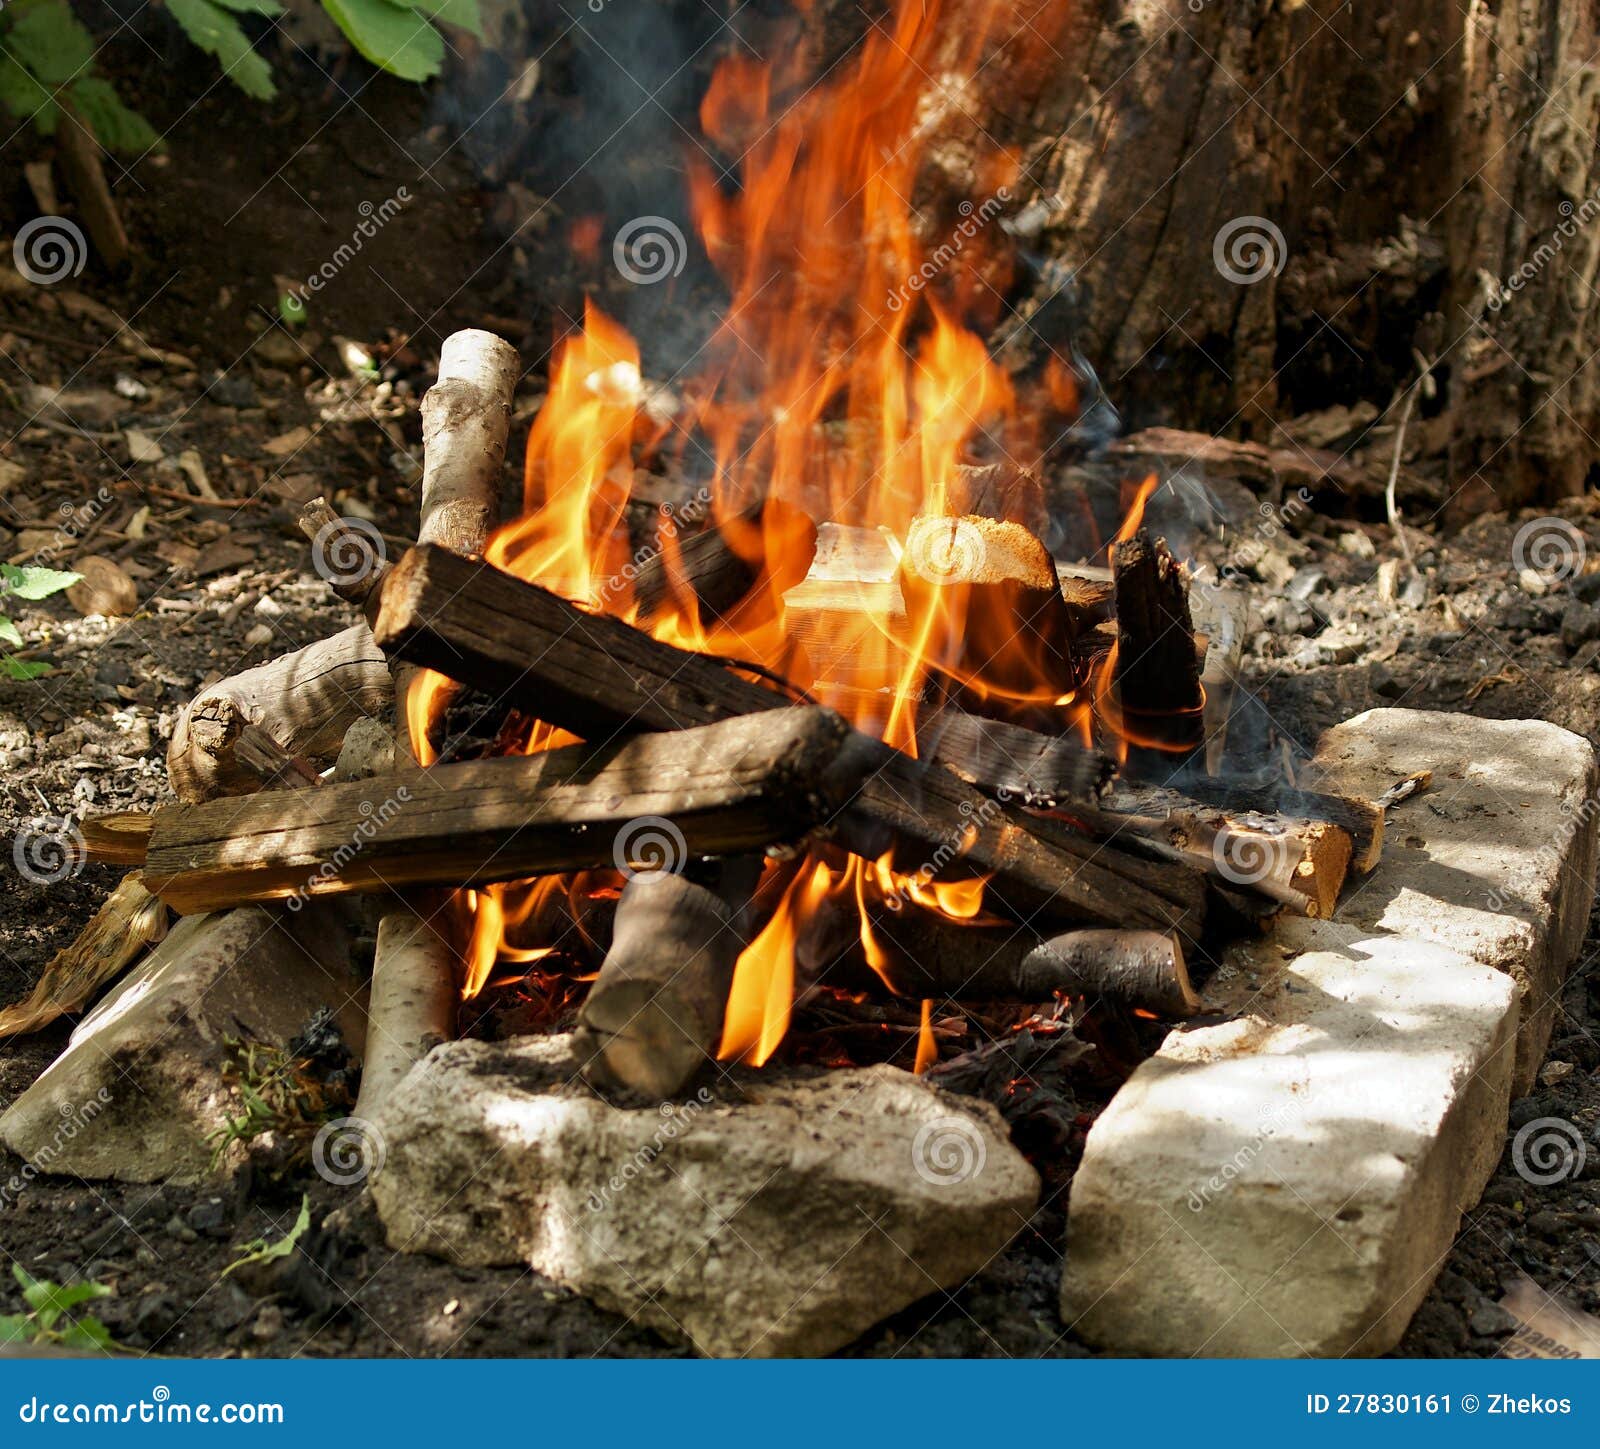 Campfire stock image. Image of camping, flame, firewood - 27830161